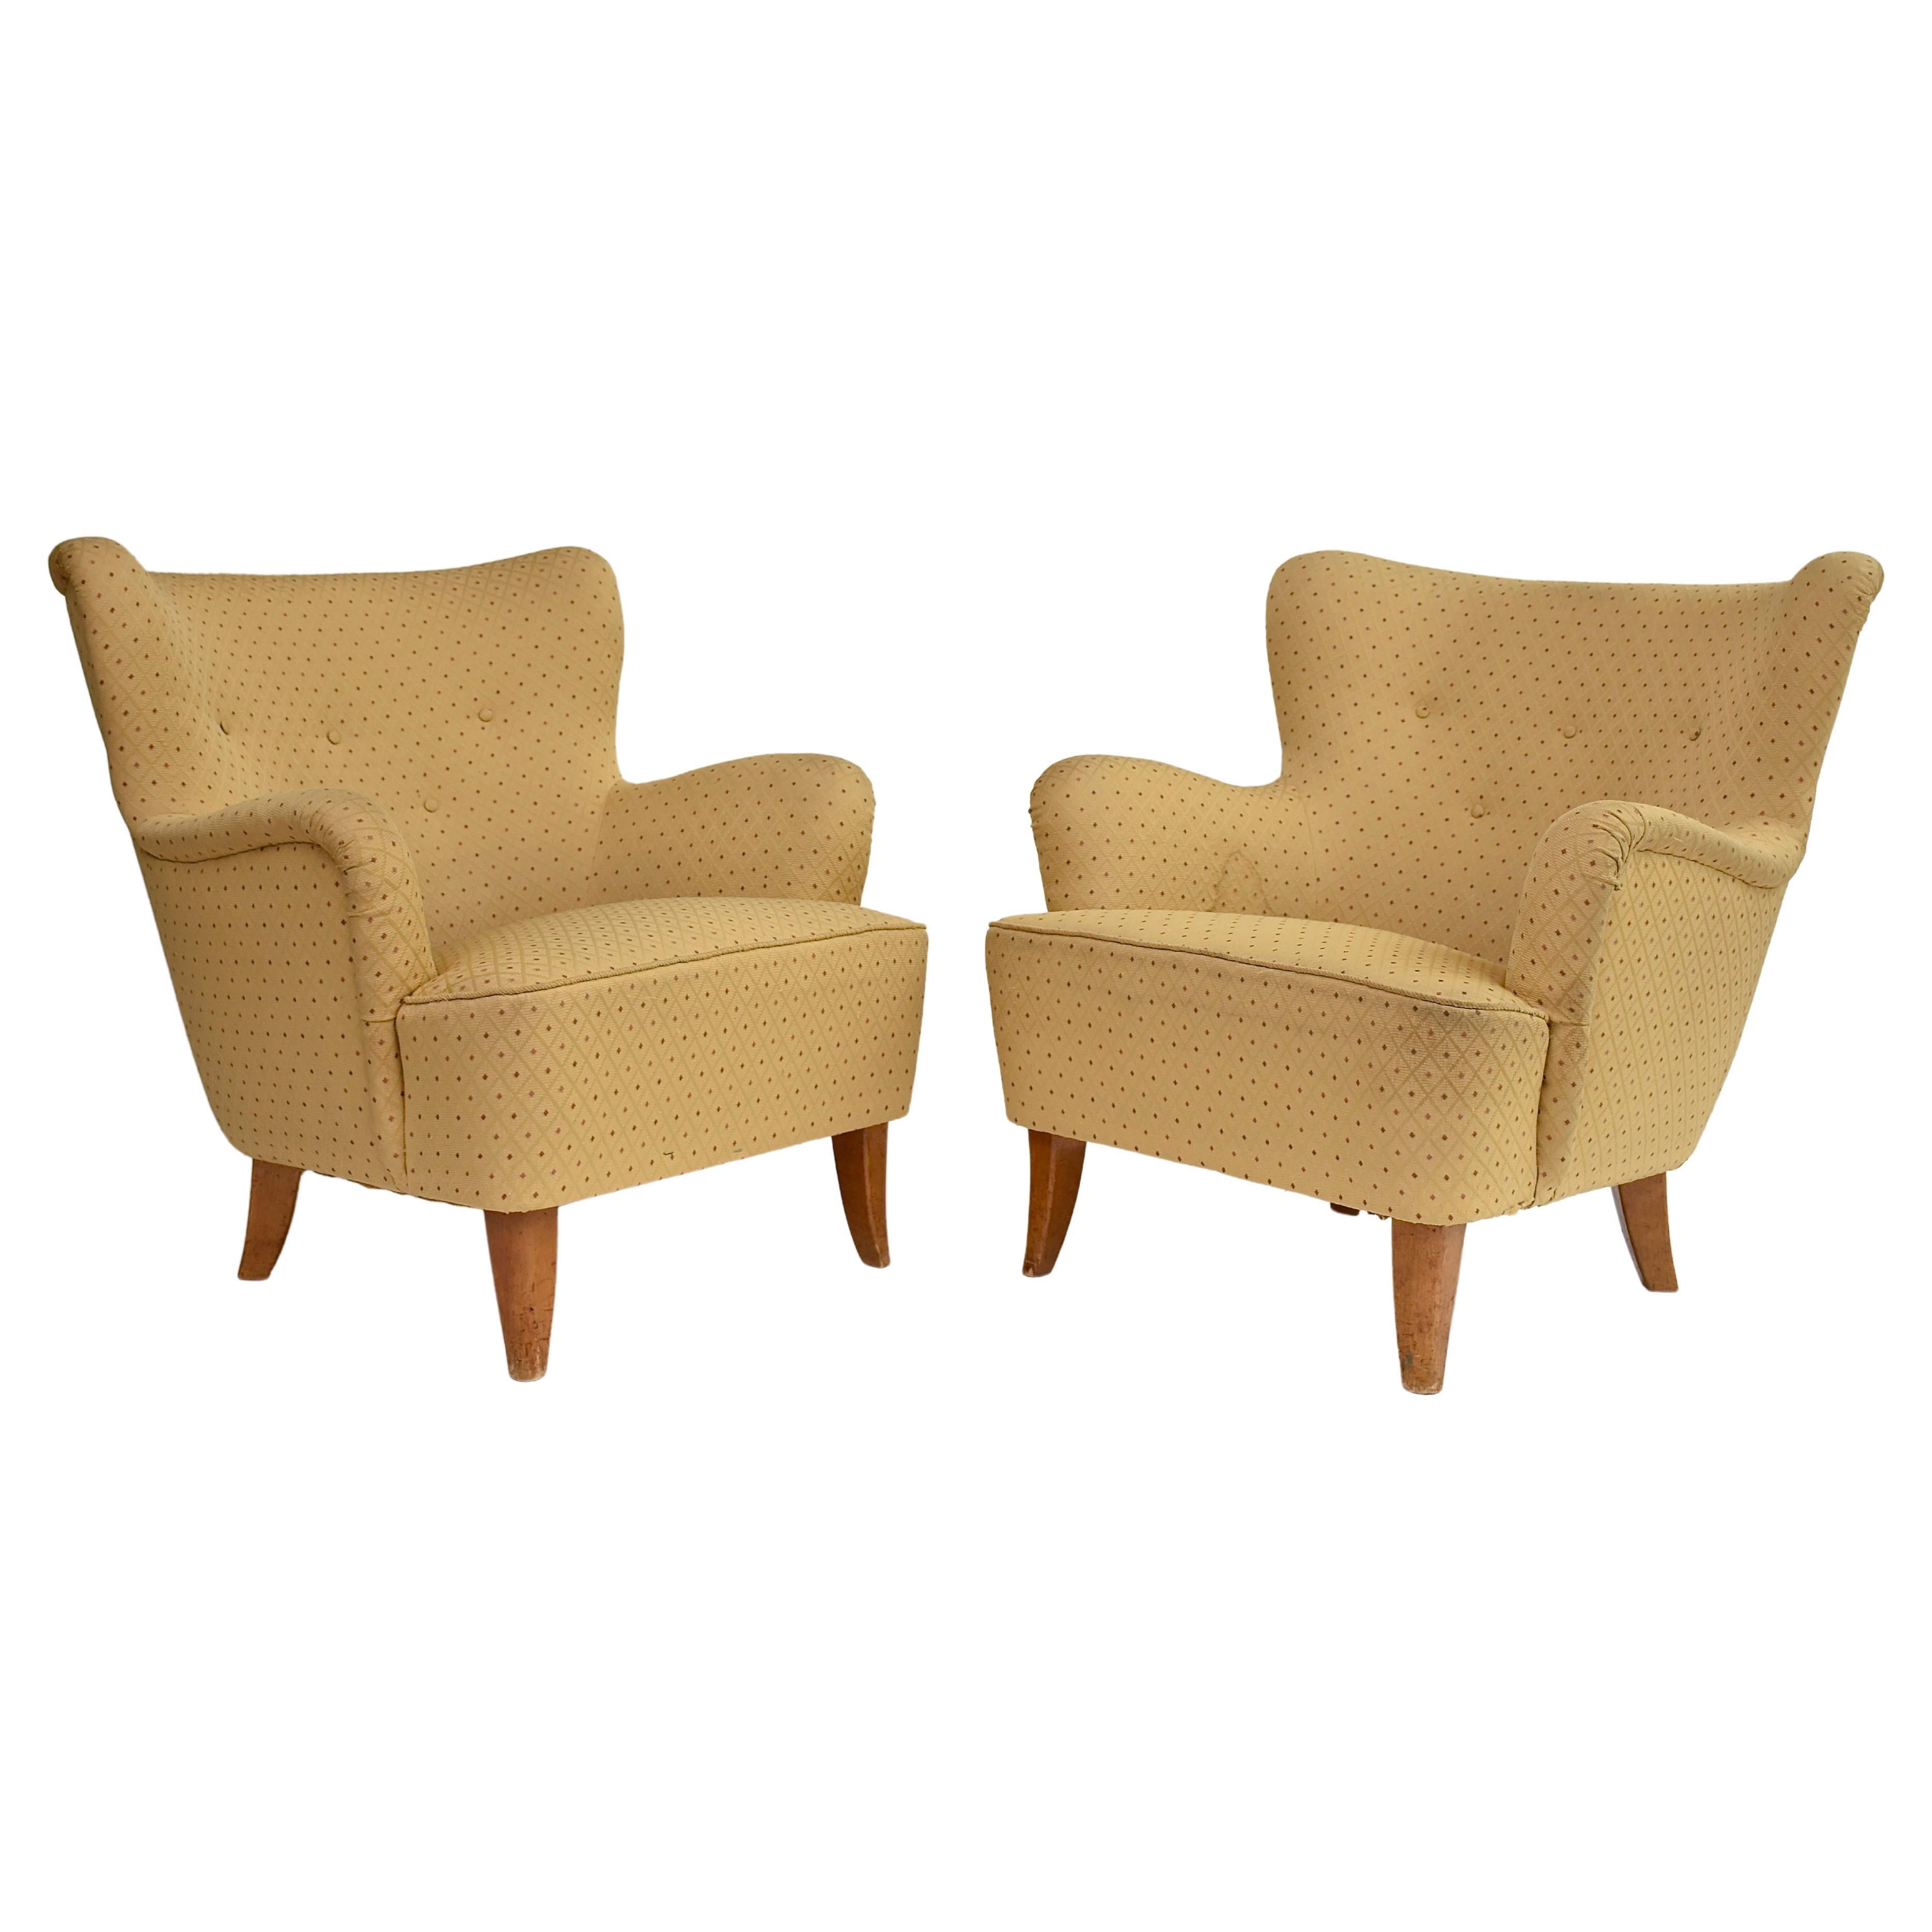 Pair of mid-century armchairs 'Laila' by Ilmari Lappalainen for Asko 1948 For Sale